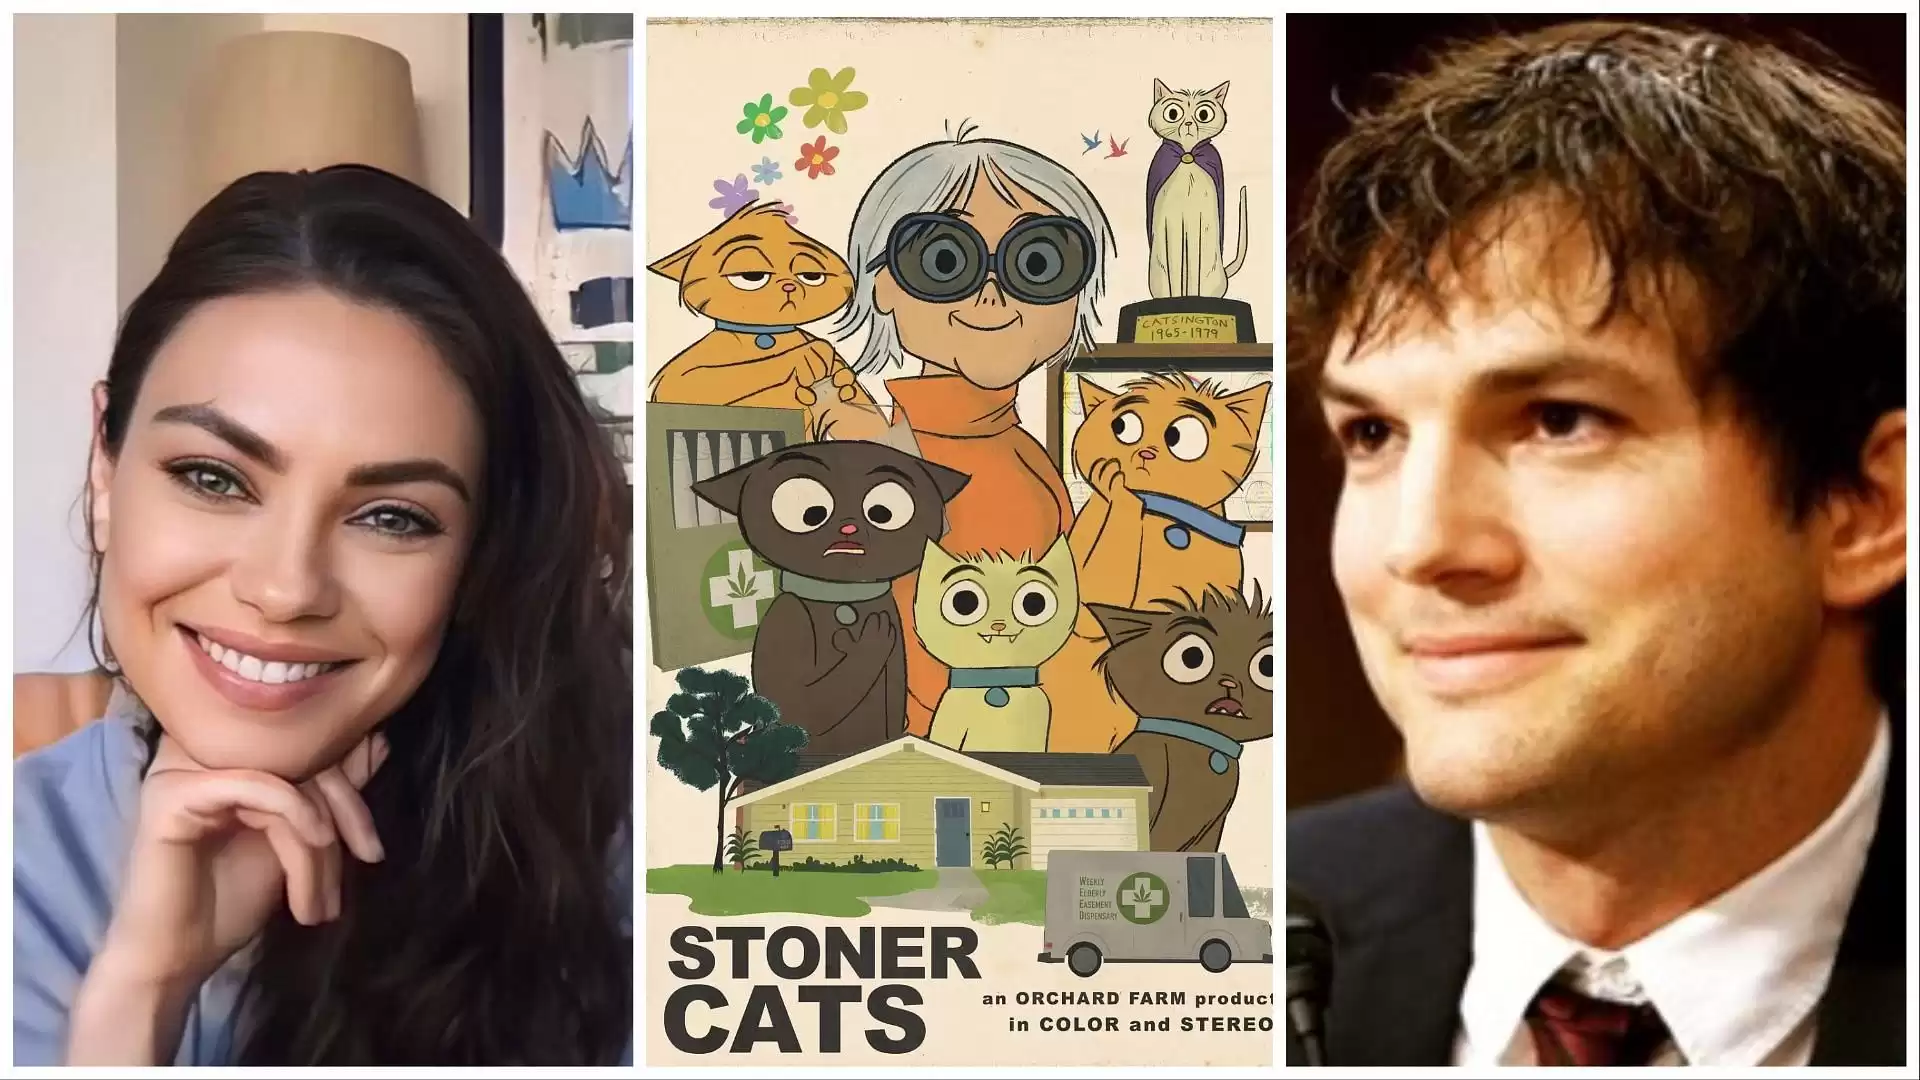 "What happened to Mila Kunis' Stoner Cats? Unregistered NFT SEC controversy explained"